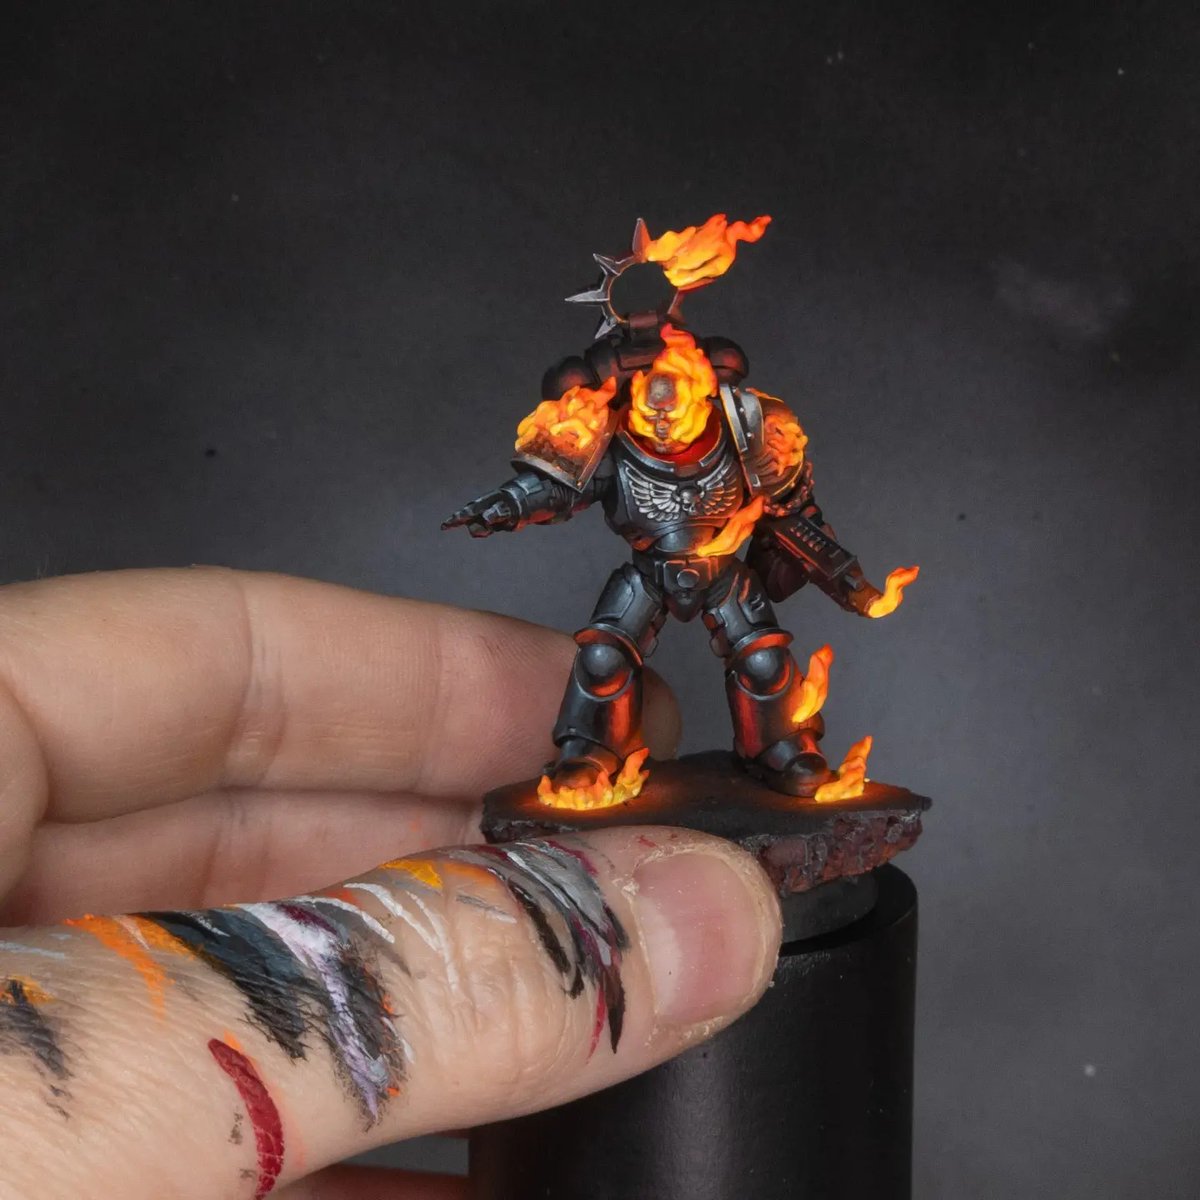 Secretly working in the shadows, my friends of @greytidestudio and with my annoying opinions in the background have prepared a pack of bits to represent 'The Cursed Company'. This is the first Captain. #warhammer40k #warhammercommunity #paintingwarhammer #warhammer